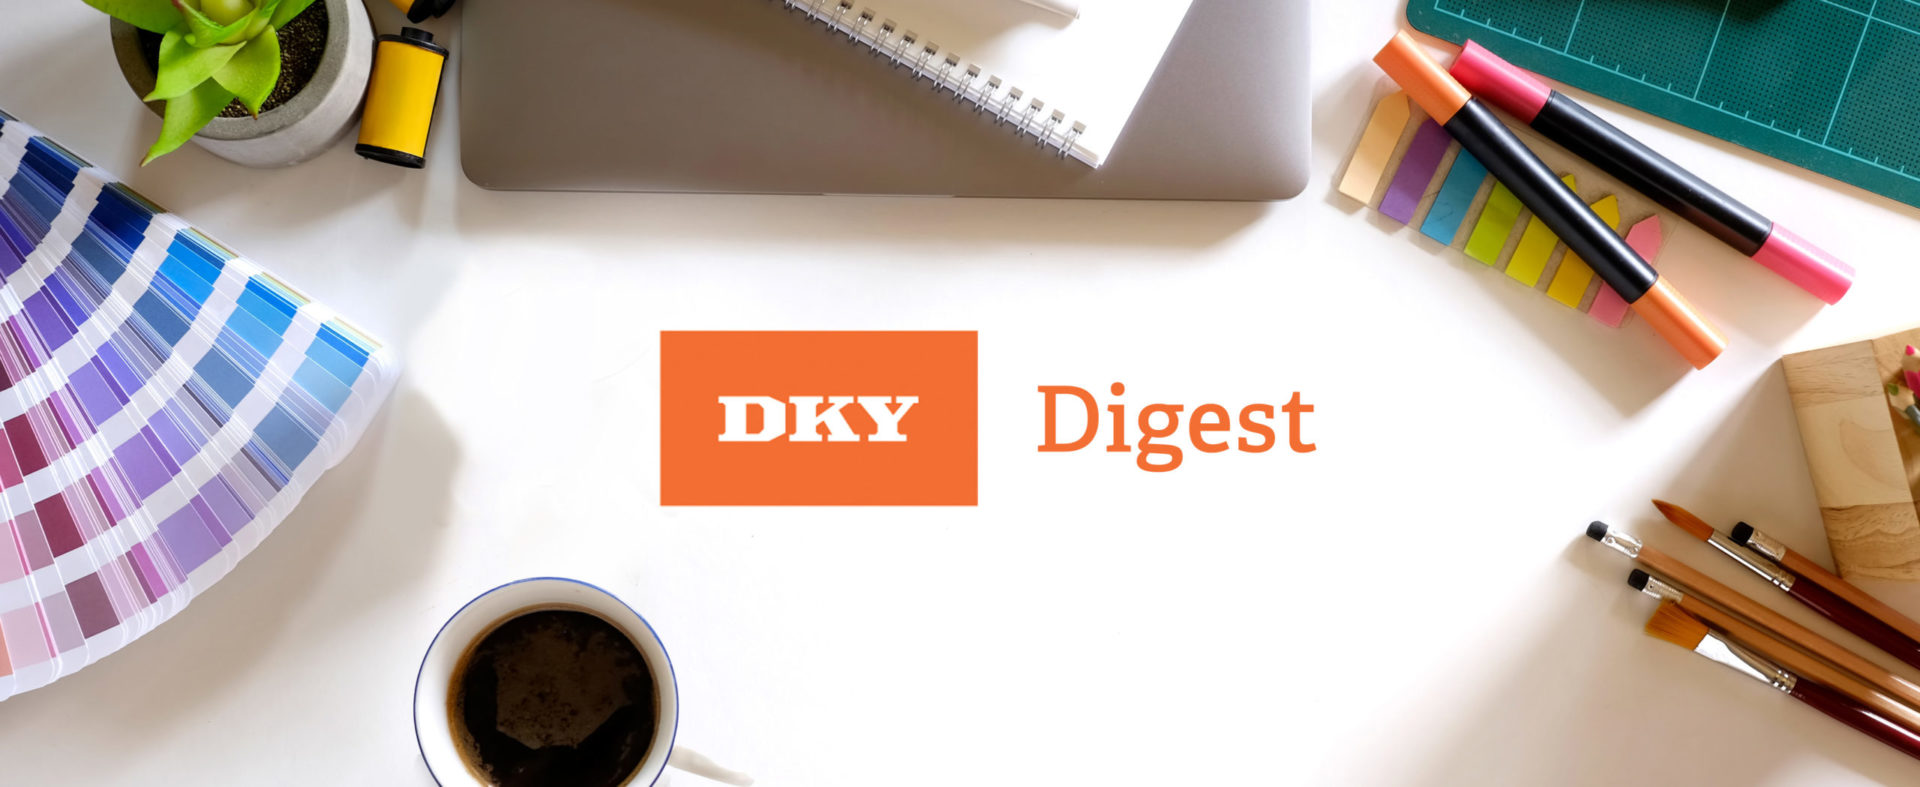 DKY digest text on desk surface